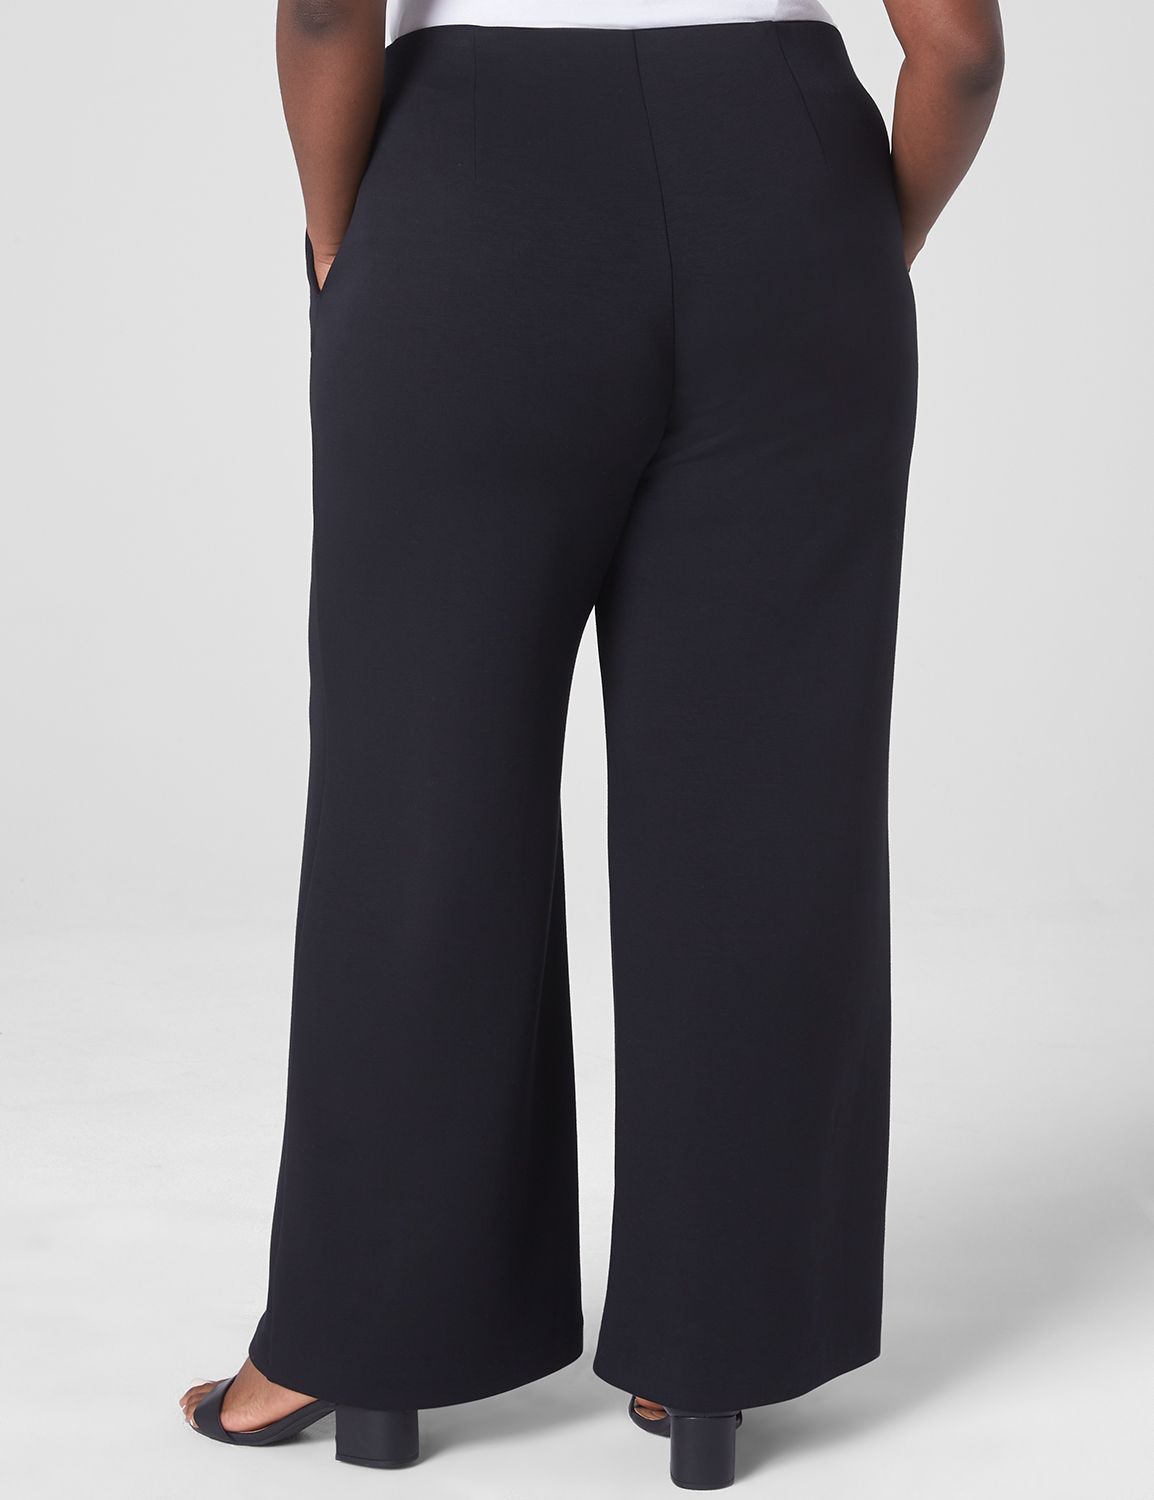 Q605 The New Loose City Leisure Wide Leg Pants Loose a Large Size